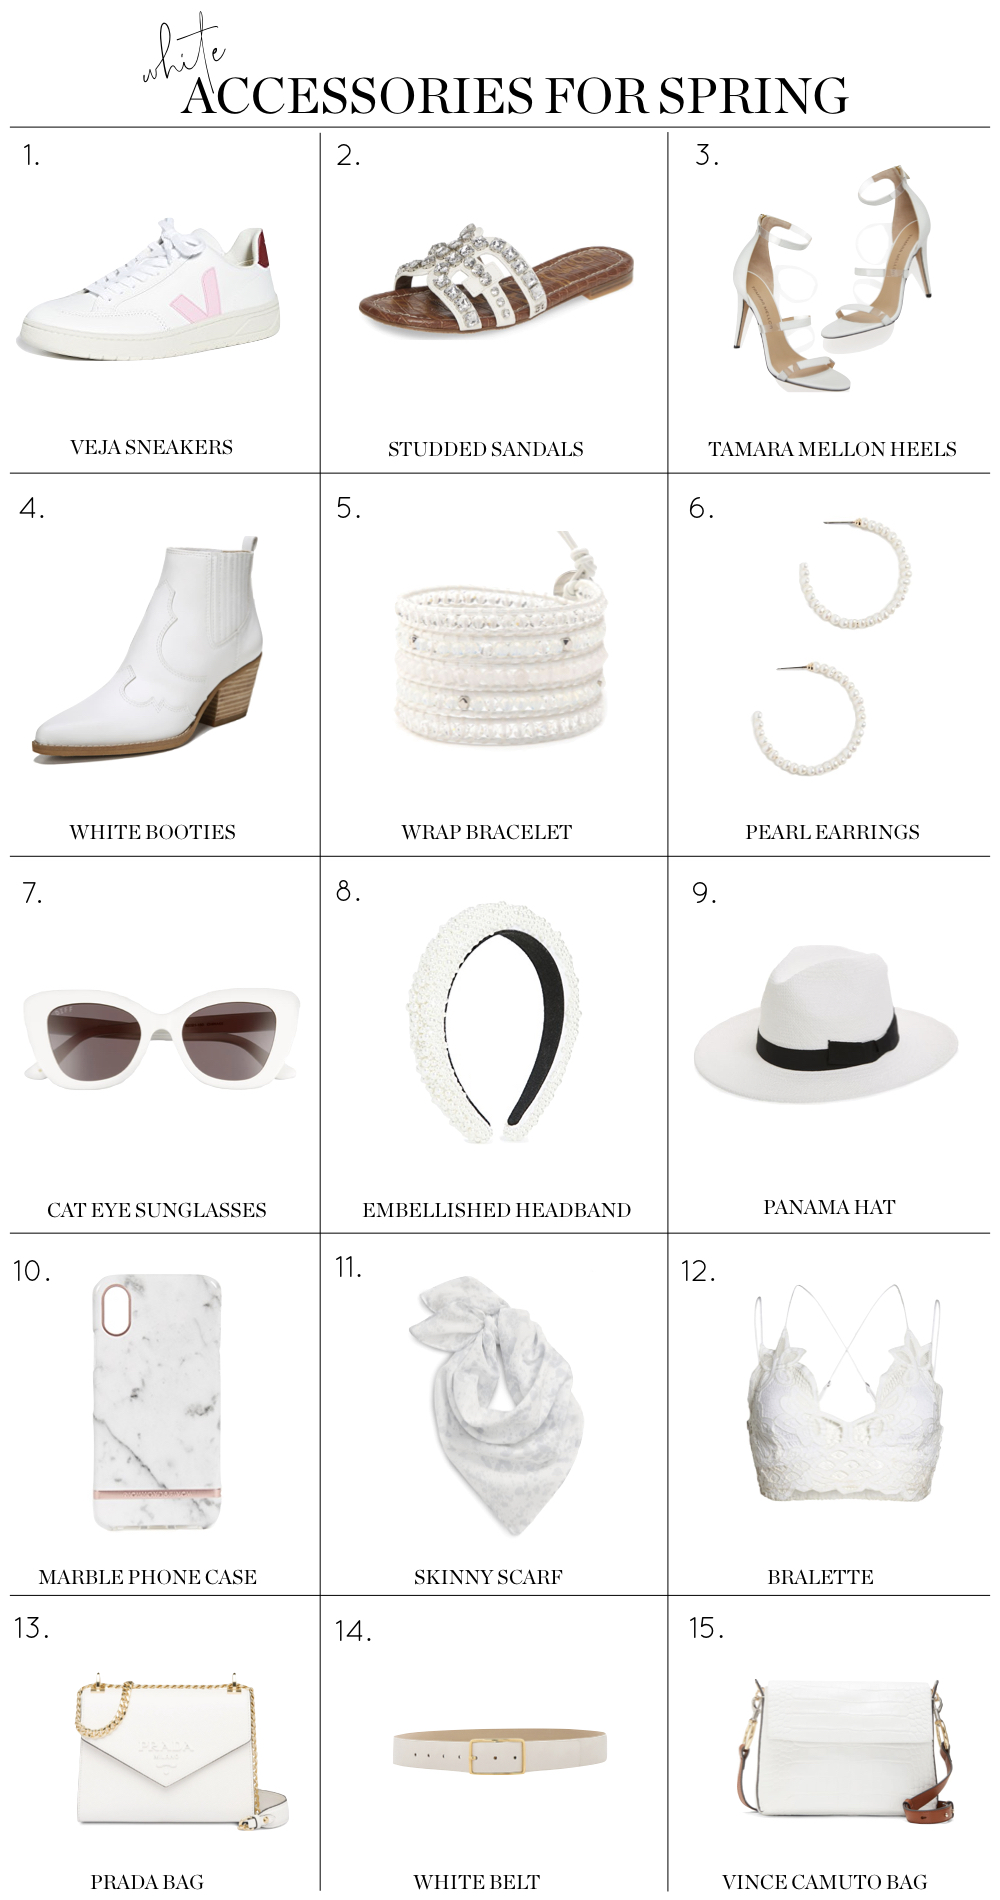 White Accessories shoes jewelry headbands purses hats for spring summer outfits